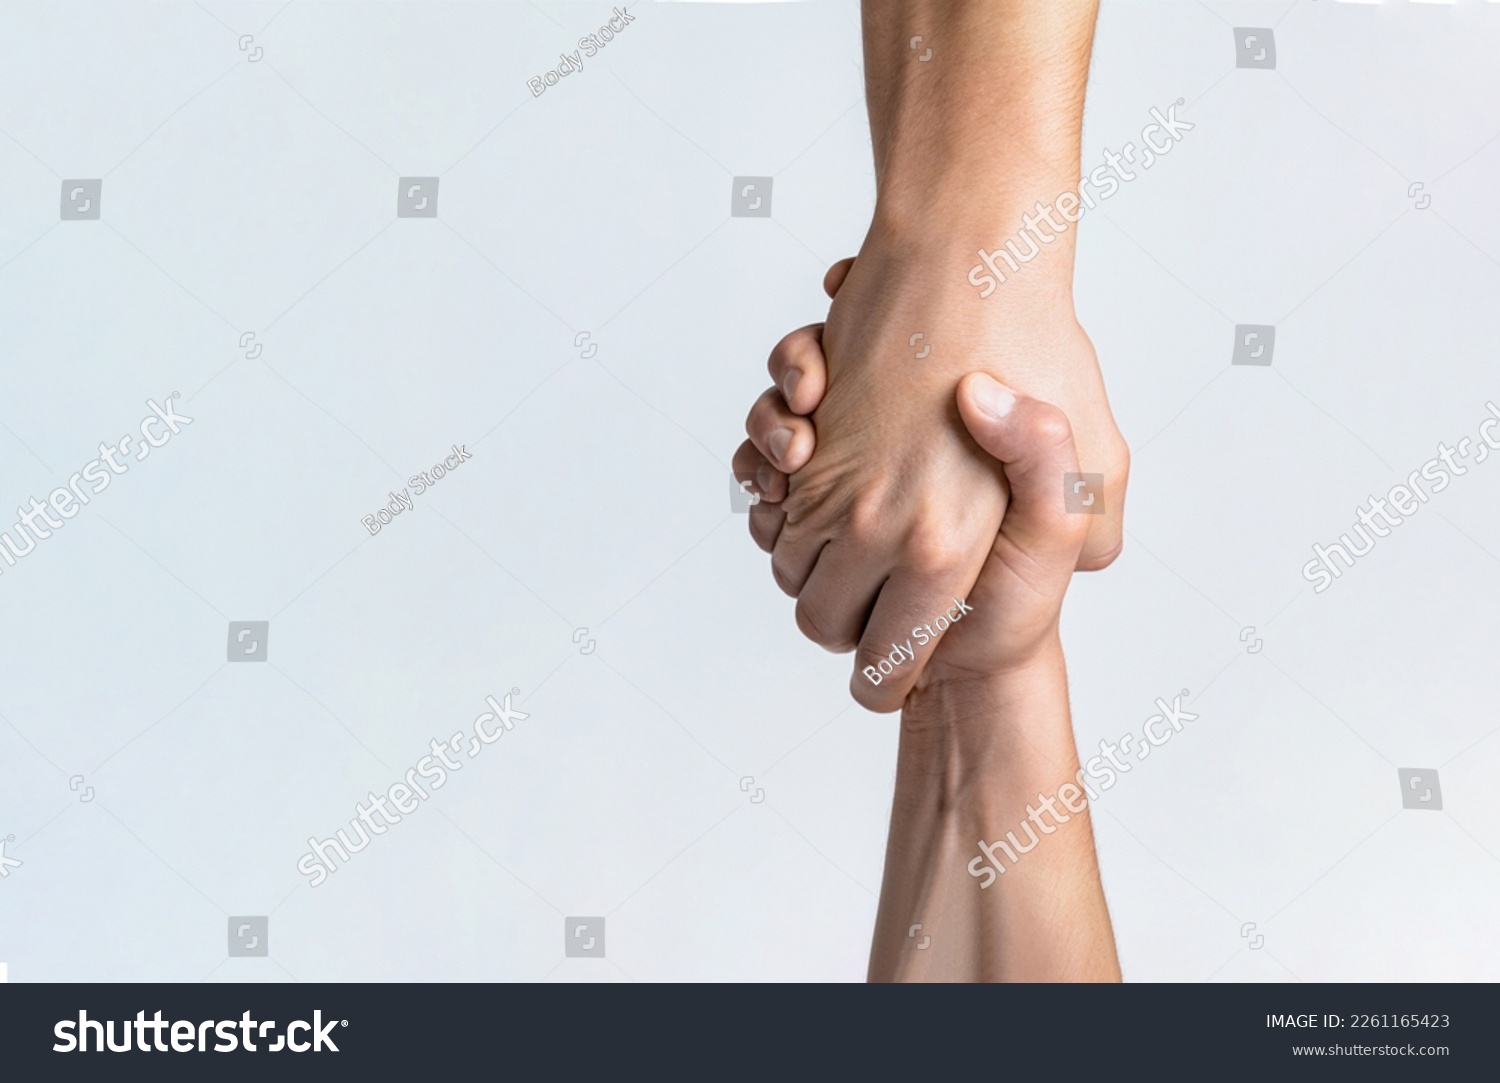 Friendly handshake, friends greeting, teamwork, friendship. Close-up. Rescue, helping gesture or hands. Strong hold. Two hands, helping hand of a friend. Handshake, arms friendship #2261165423